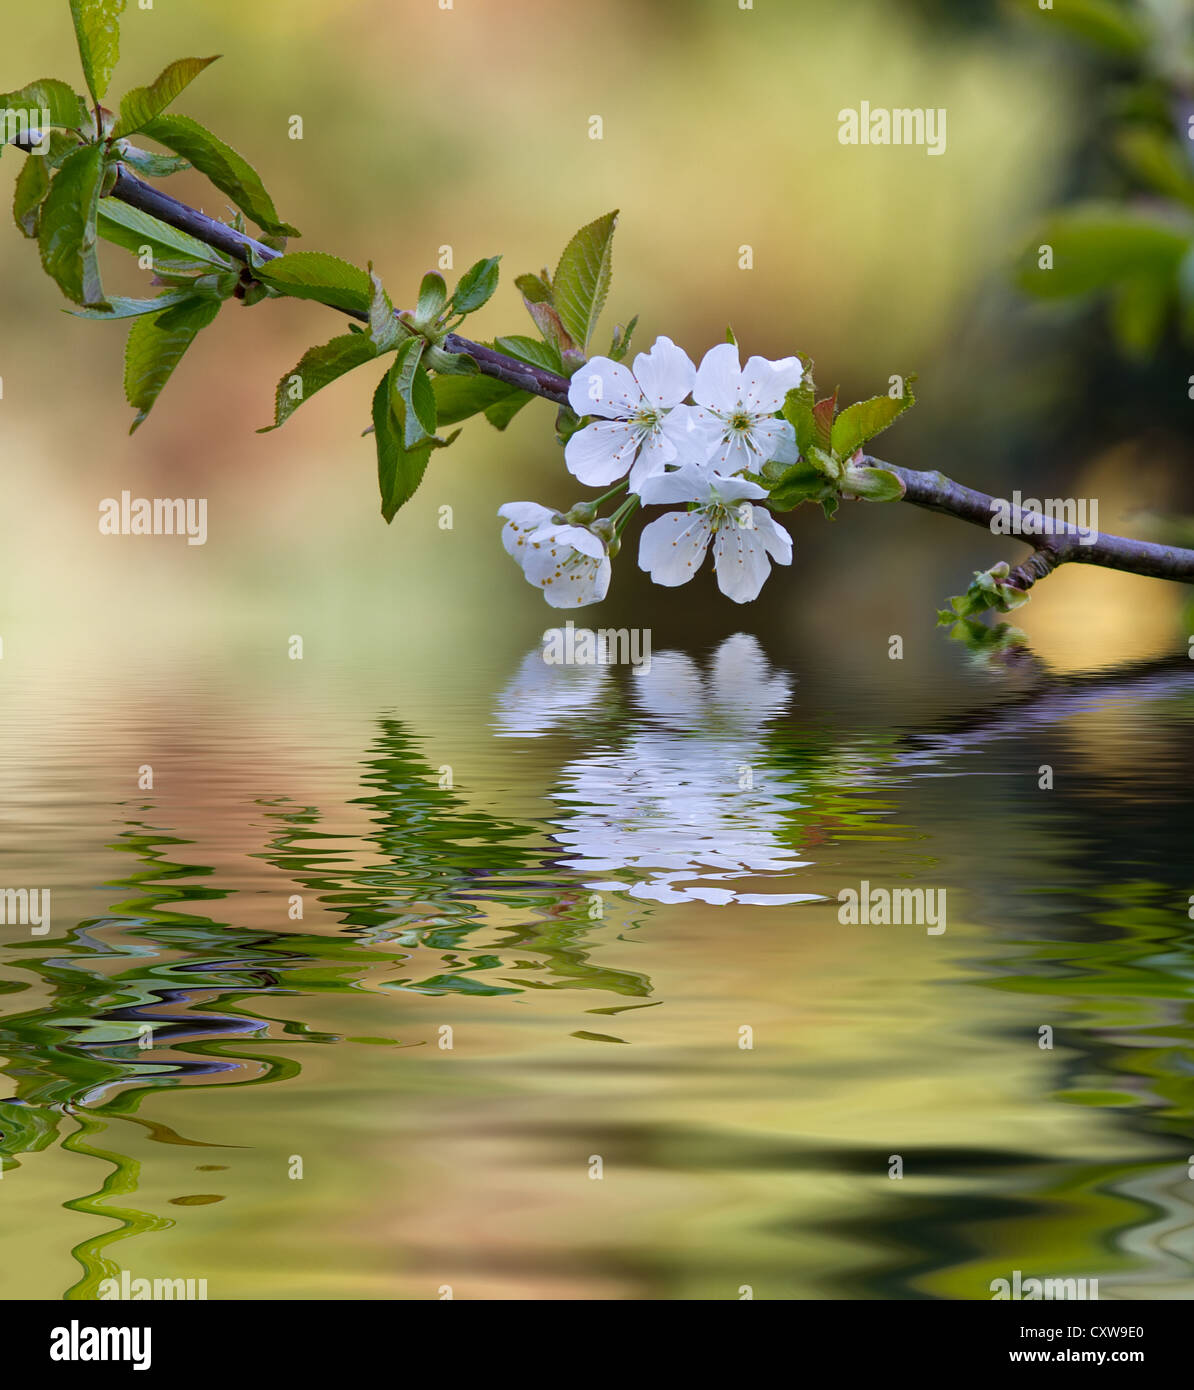 Plum tree blossom and reflection in water. Stock Photo